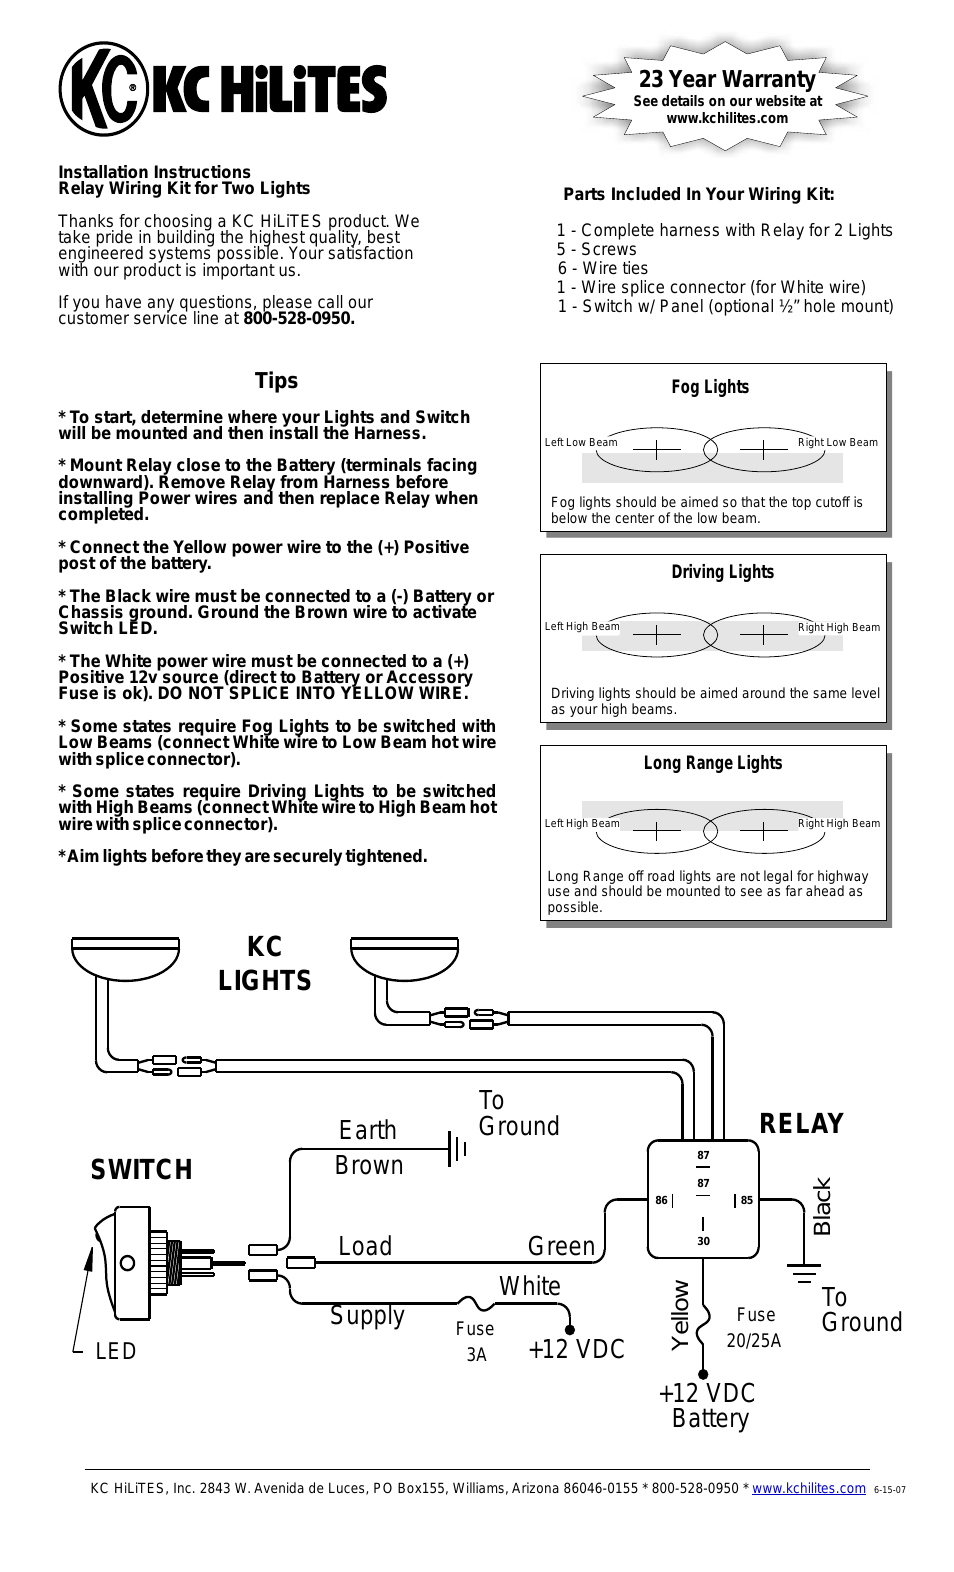 Relay Wiring Kit for Two Lights Installation Instructions